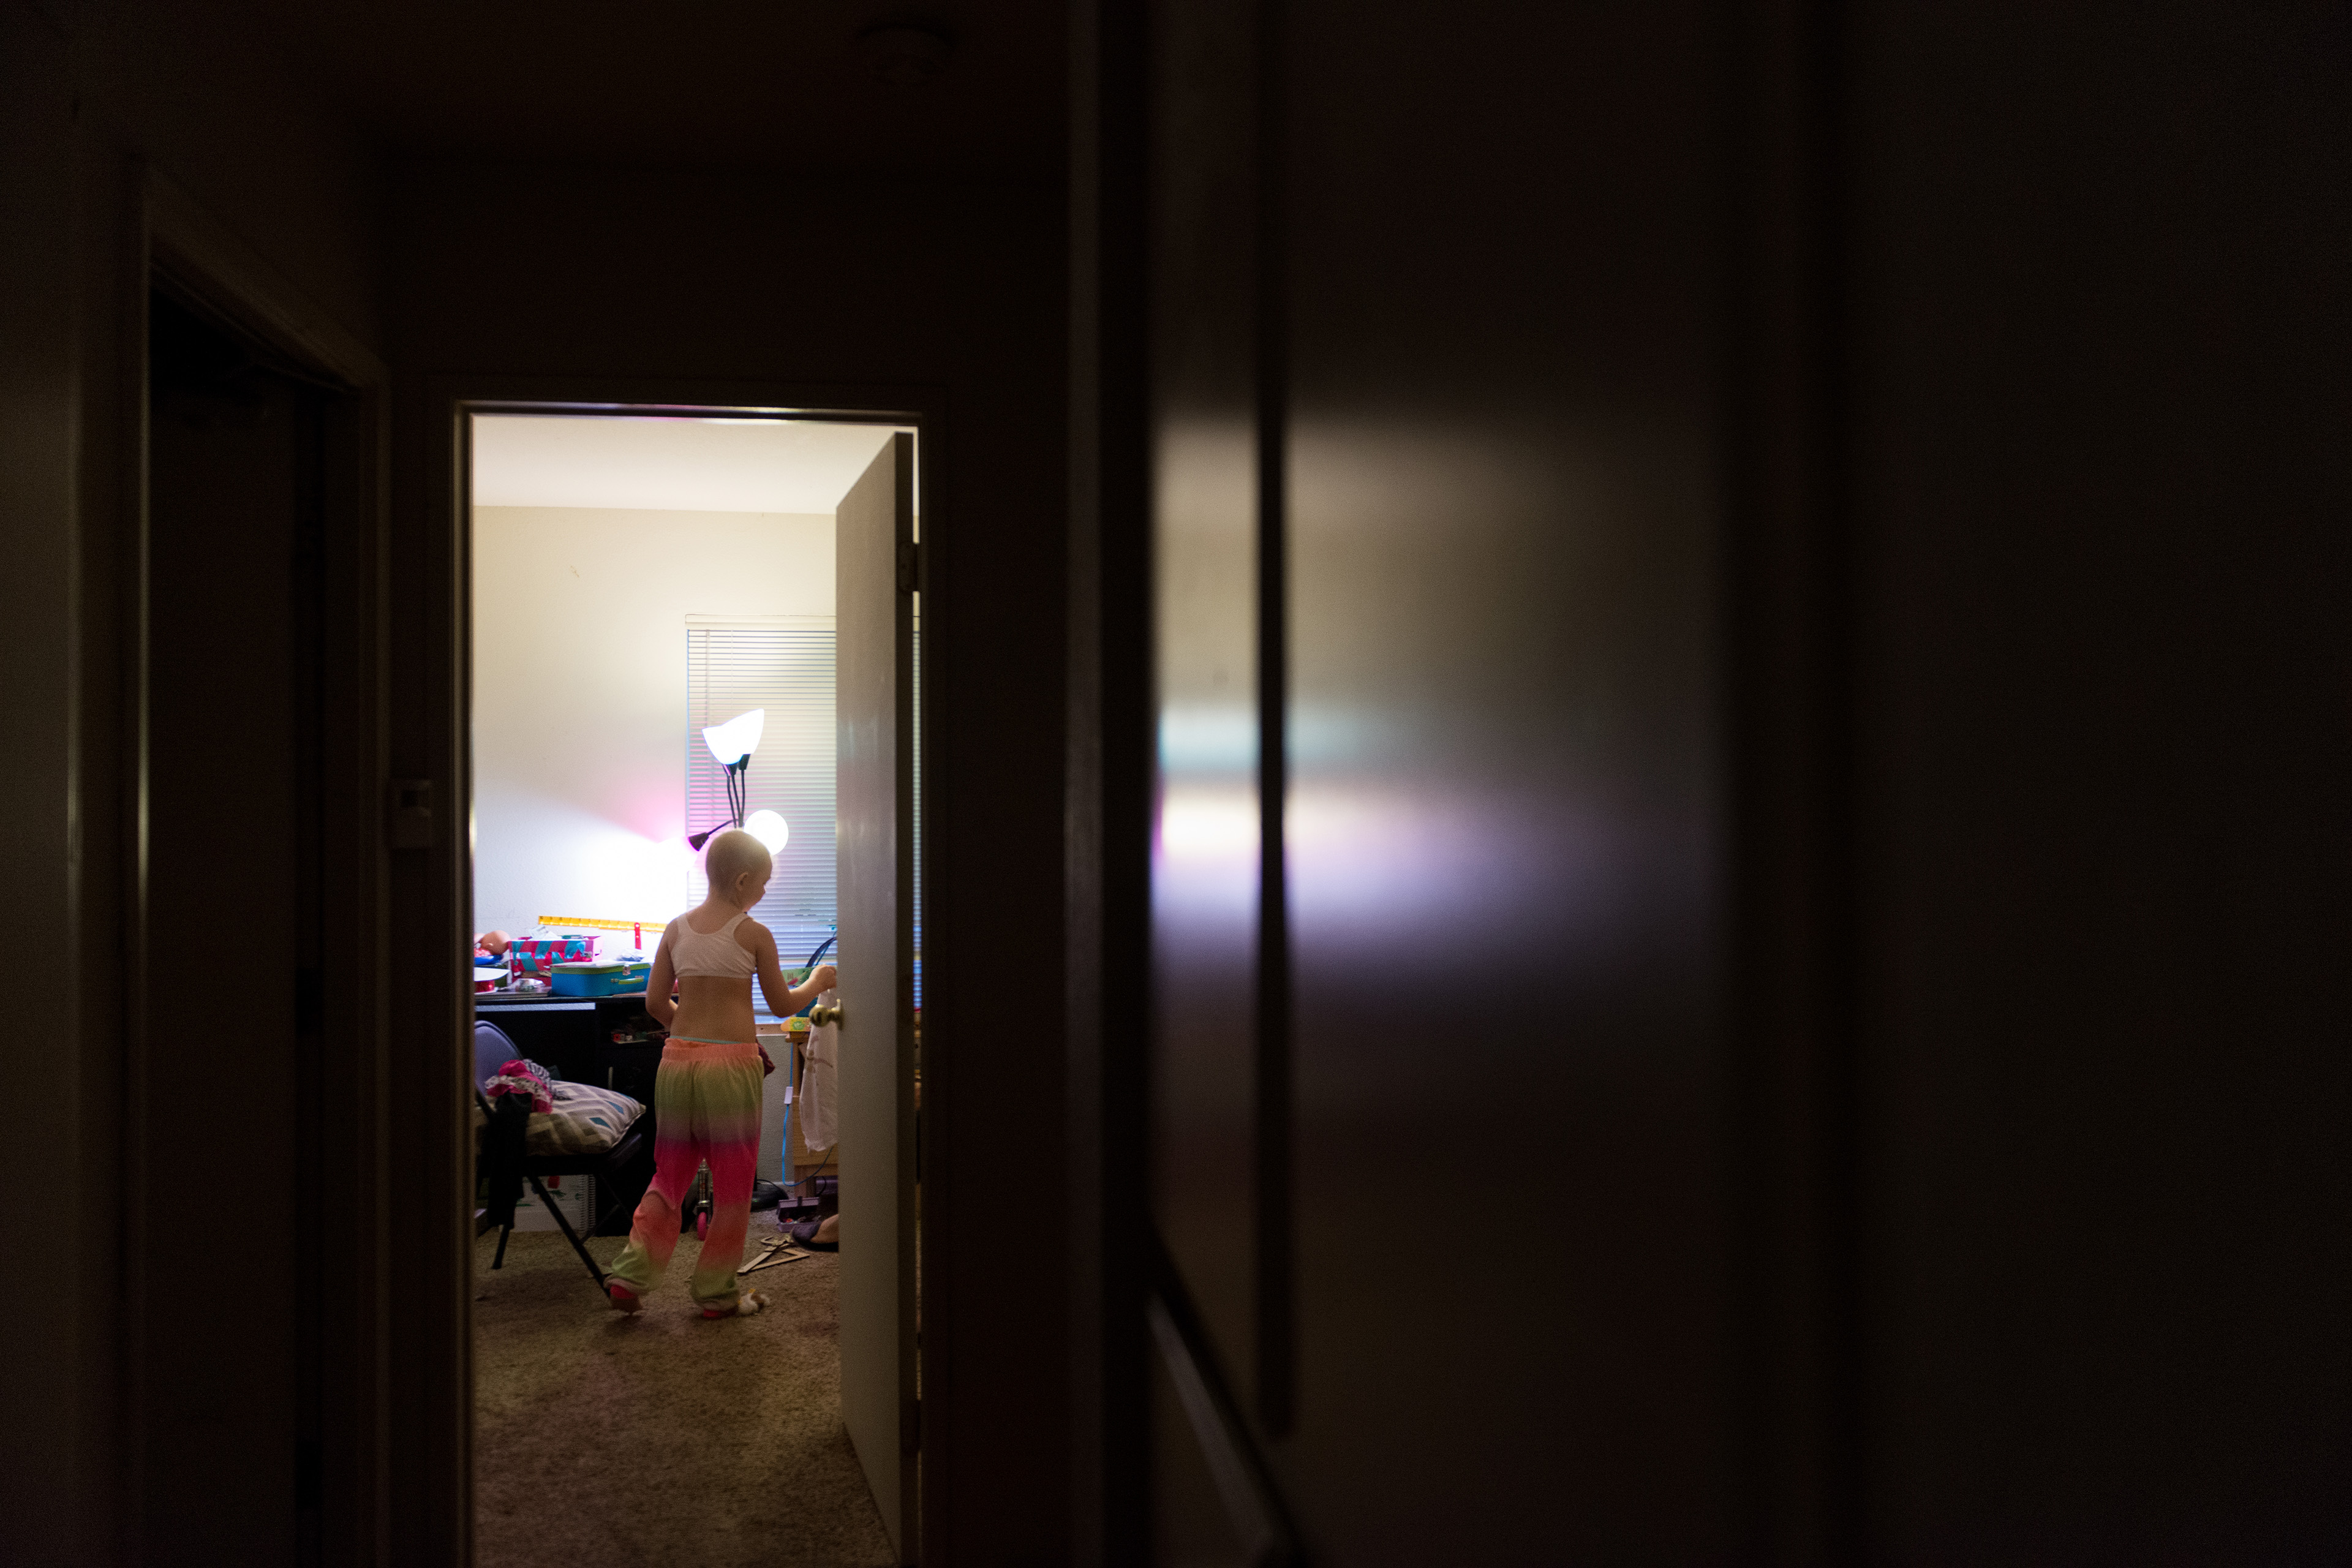 A doorway illuminates a long, dark hallway. In the room, you can see a young girl and some of her room, illuminated in a pinkish hue from her lamp.